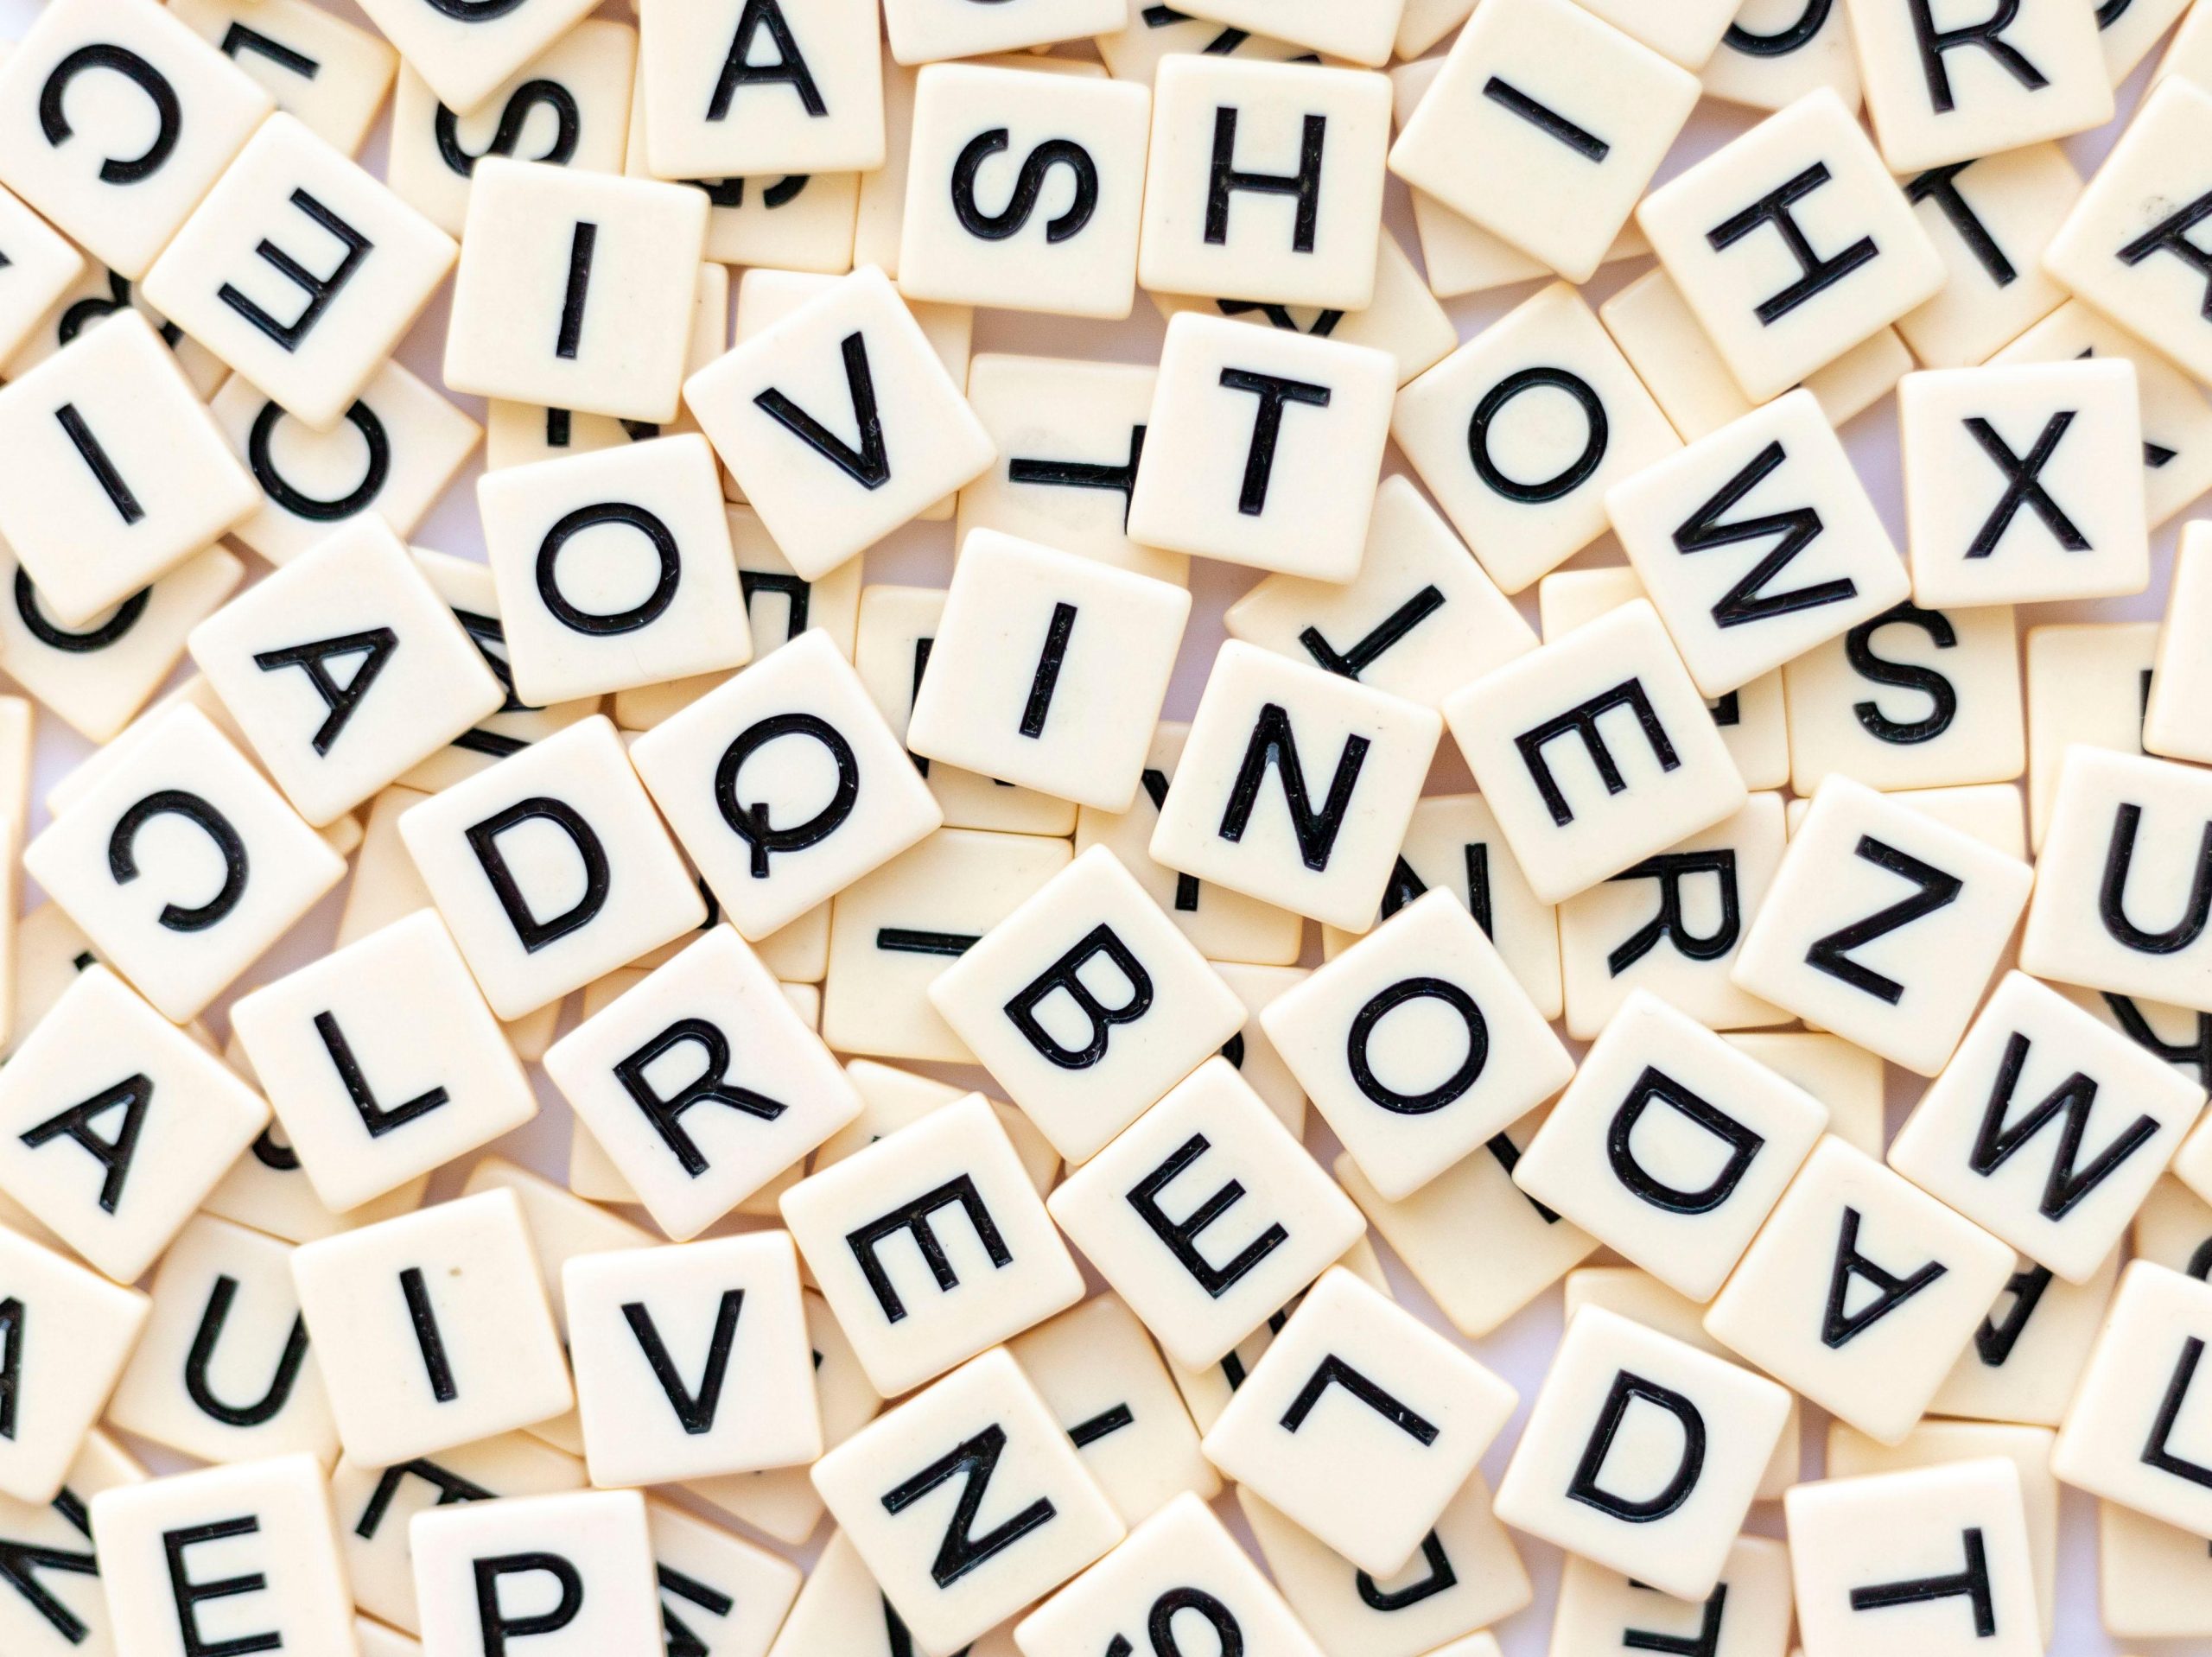 Wordle is an online word game that has taken the world by storm. Why?